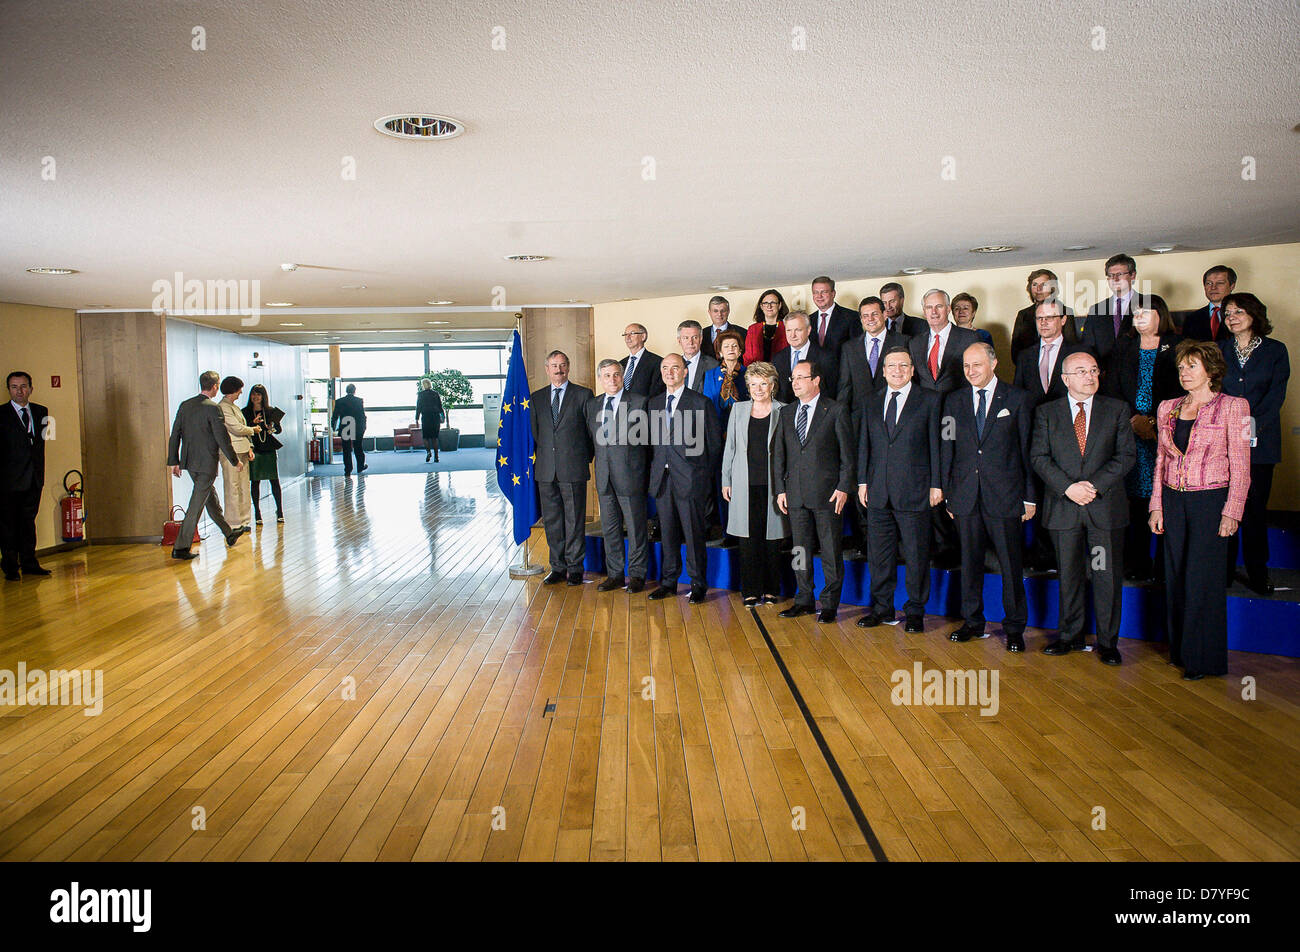 Brussels, Belgium. 15th May, 2013. French President Francois Hollande (L) and European Commission President Jose Manuel Barroso (R) talk during a family photo with members of the European Commision prior to a meeting, ahead of an international donor conference for the development of Mali, at EU headquarters    in Brussels, Belgium. Credit: dpa/Alamy Live News Stock Photo